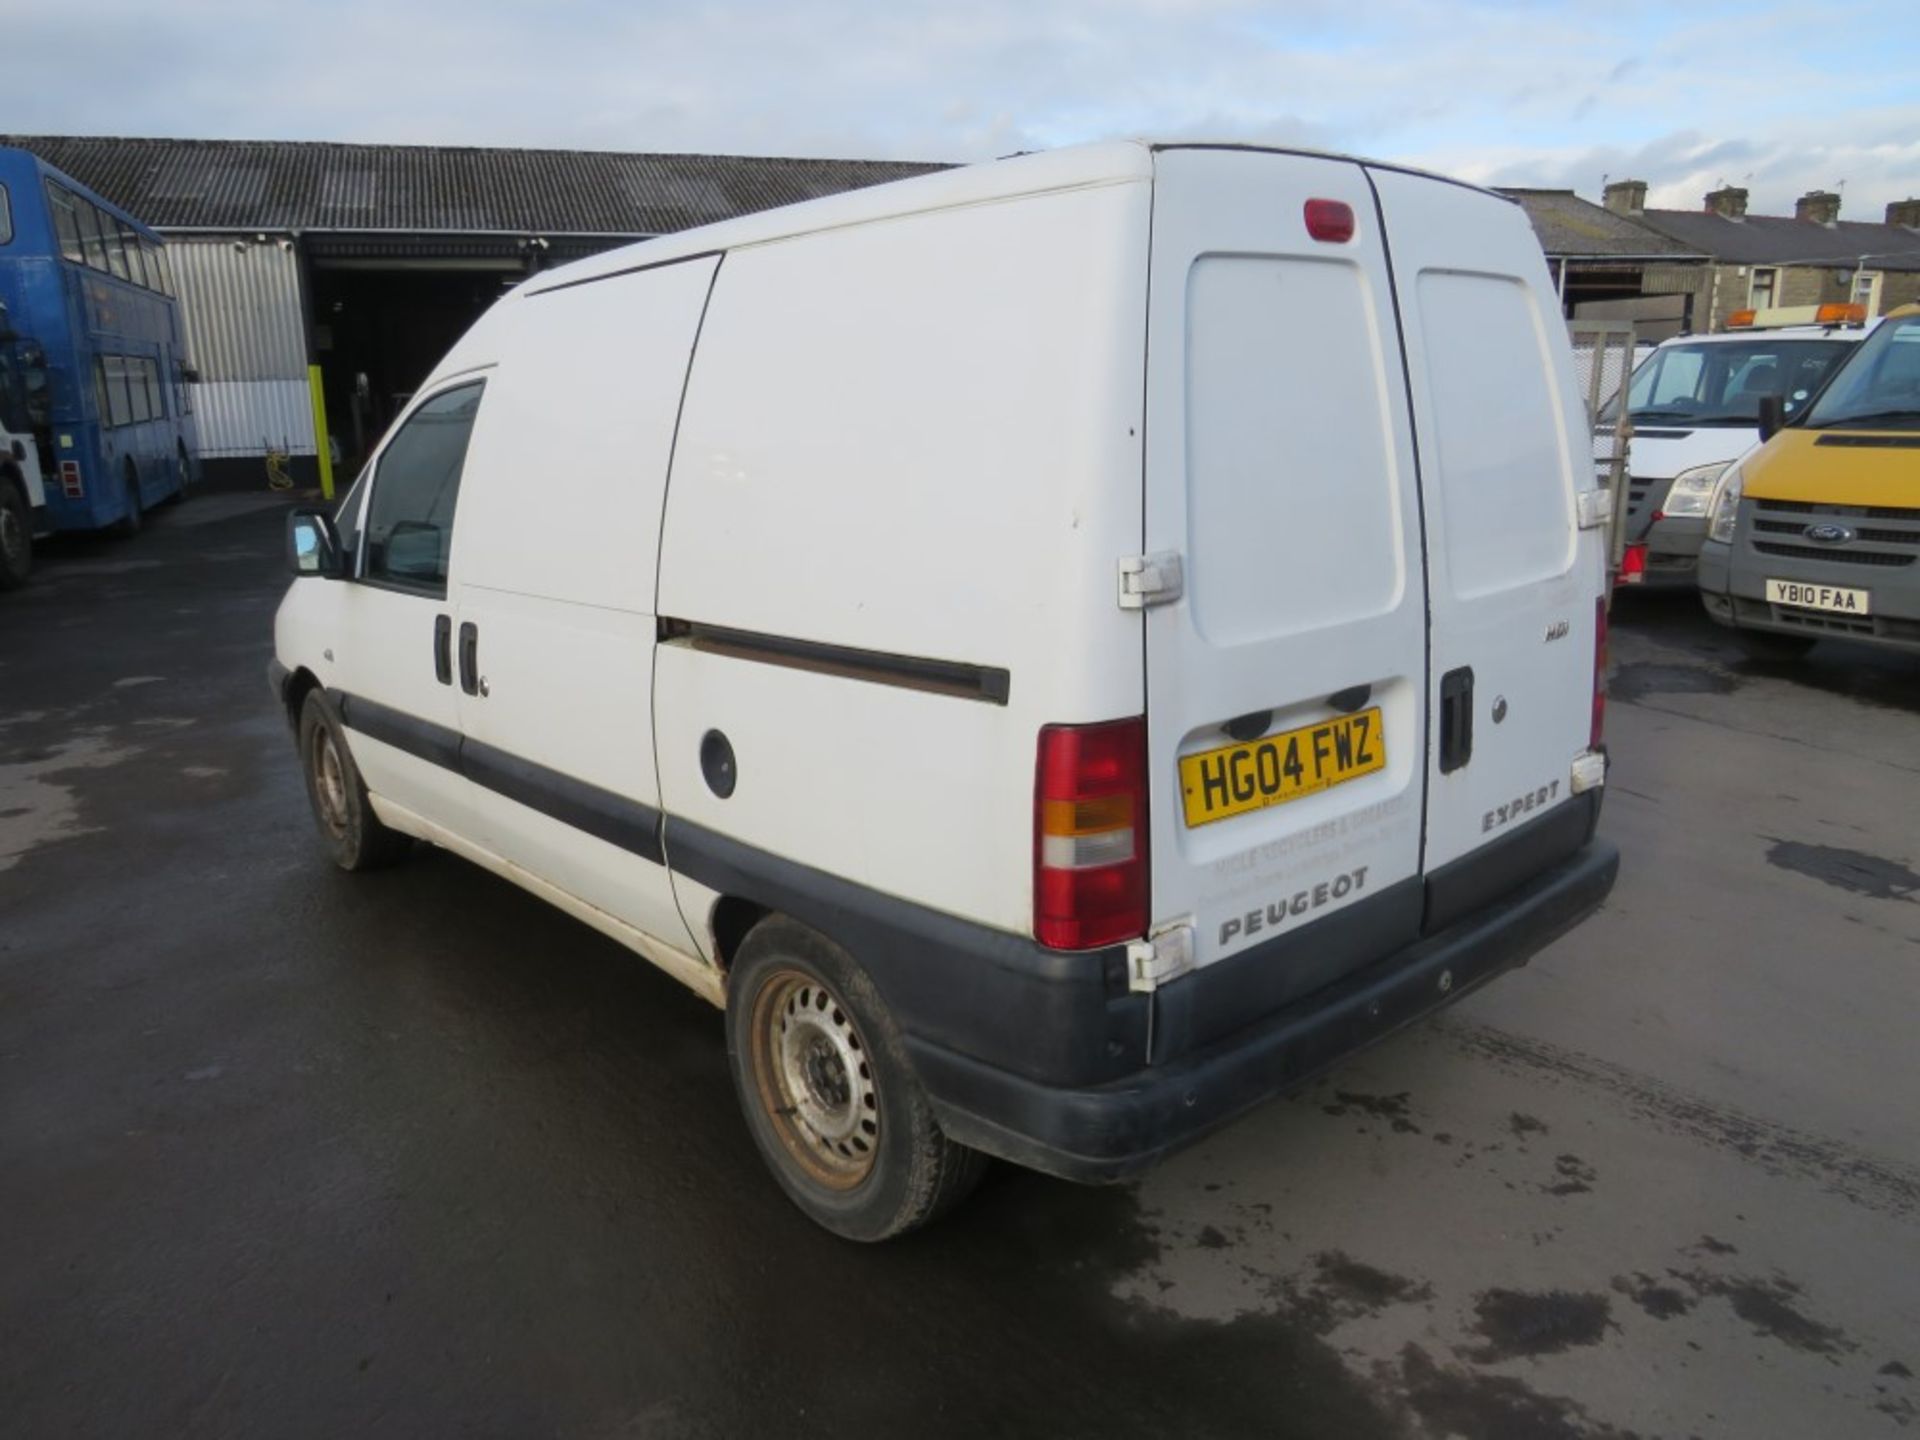 04 reg PEUGEOT EXPERT 900 HDI, 1ST REG 03/04, 164424M NOT WARRANTED, V5 HERE, 8 FORMER KEEPERS [+ - Image 3 of 6